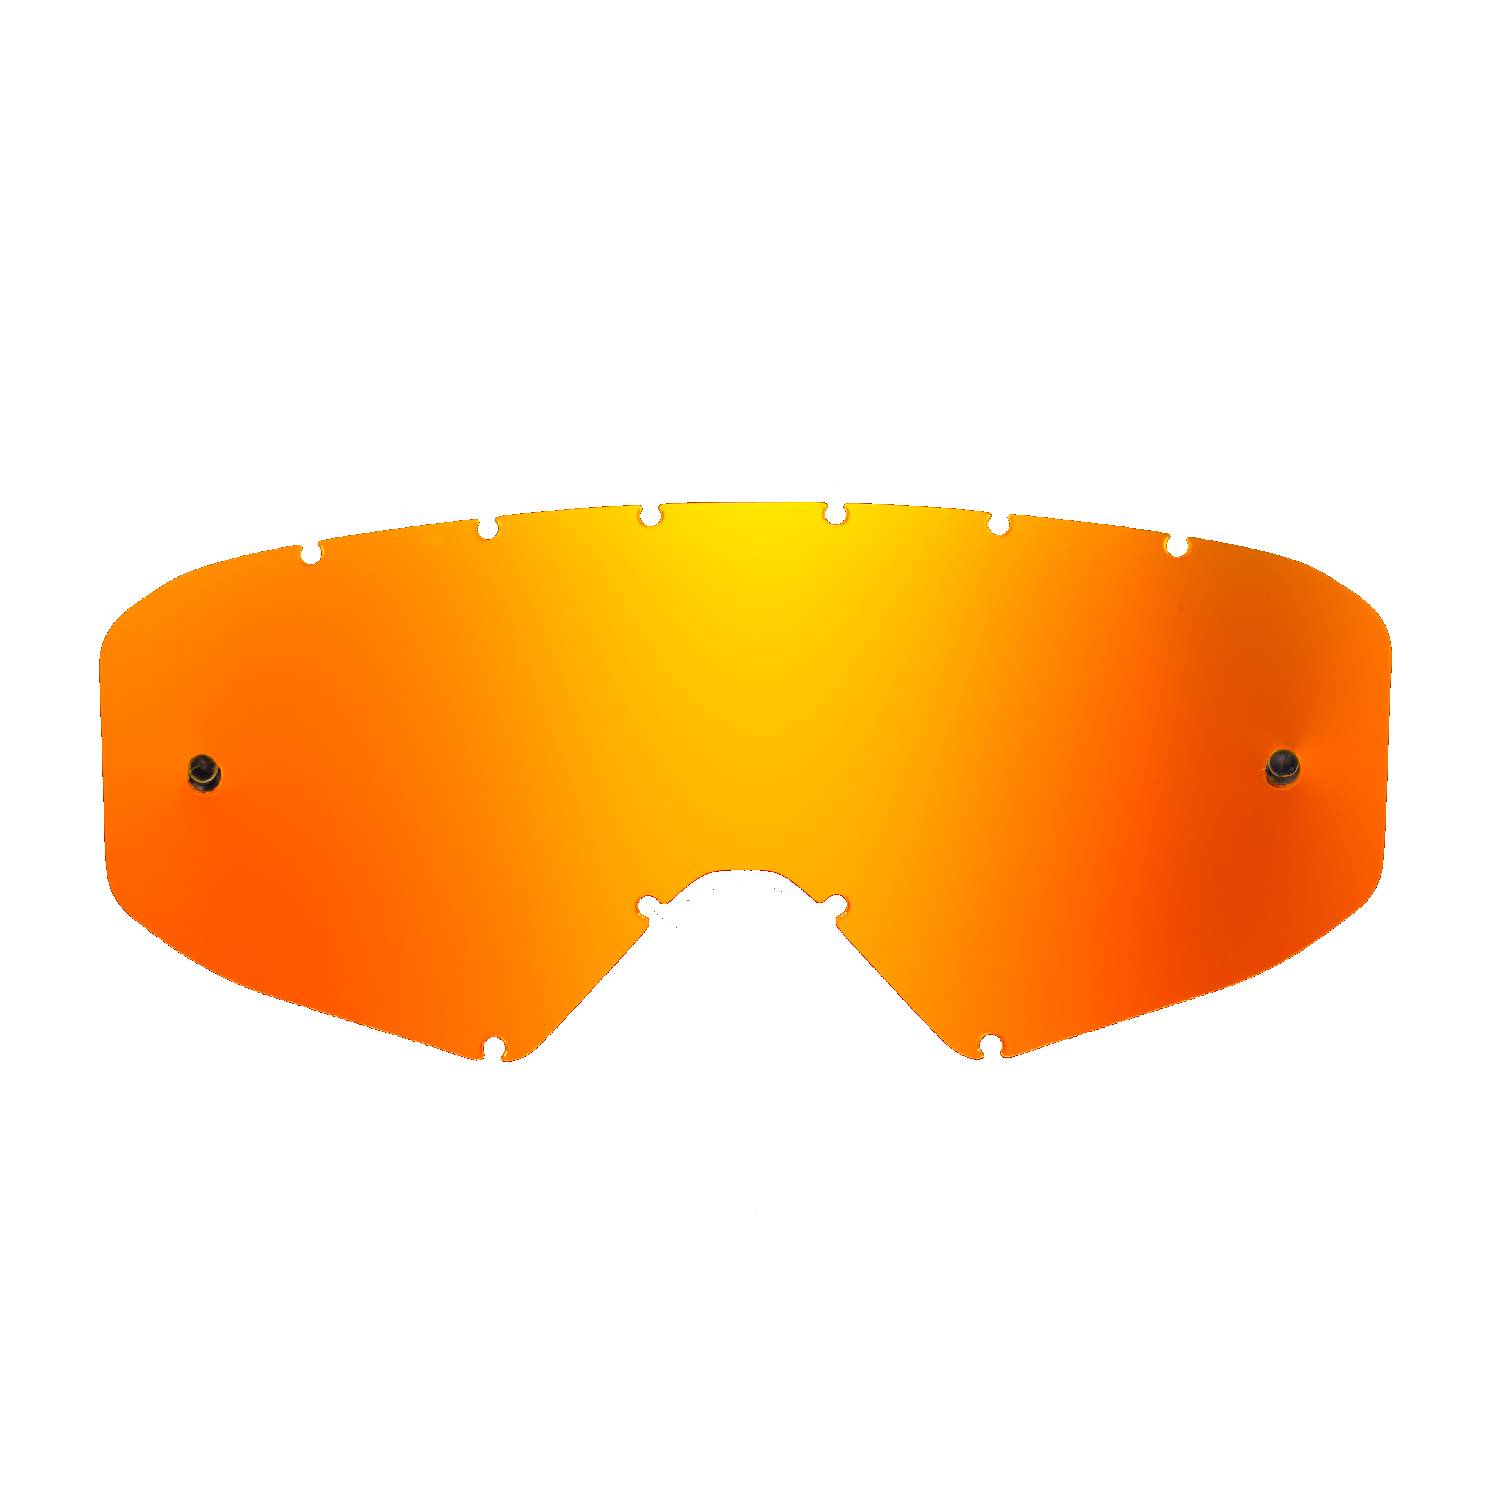 red-toned mirrored replacement lenses for goggles compatible for Ethen Zerocinque goggle